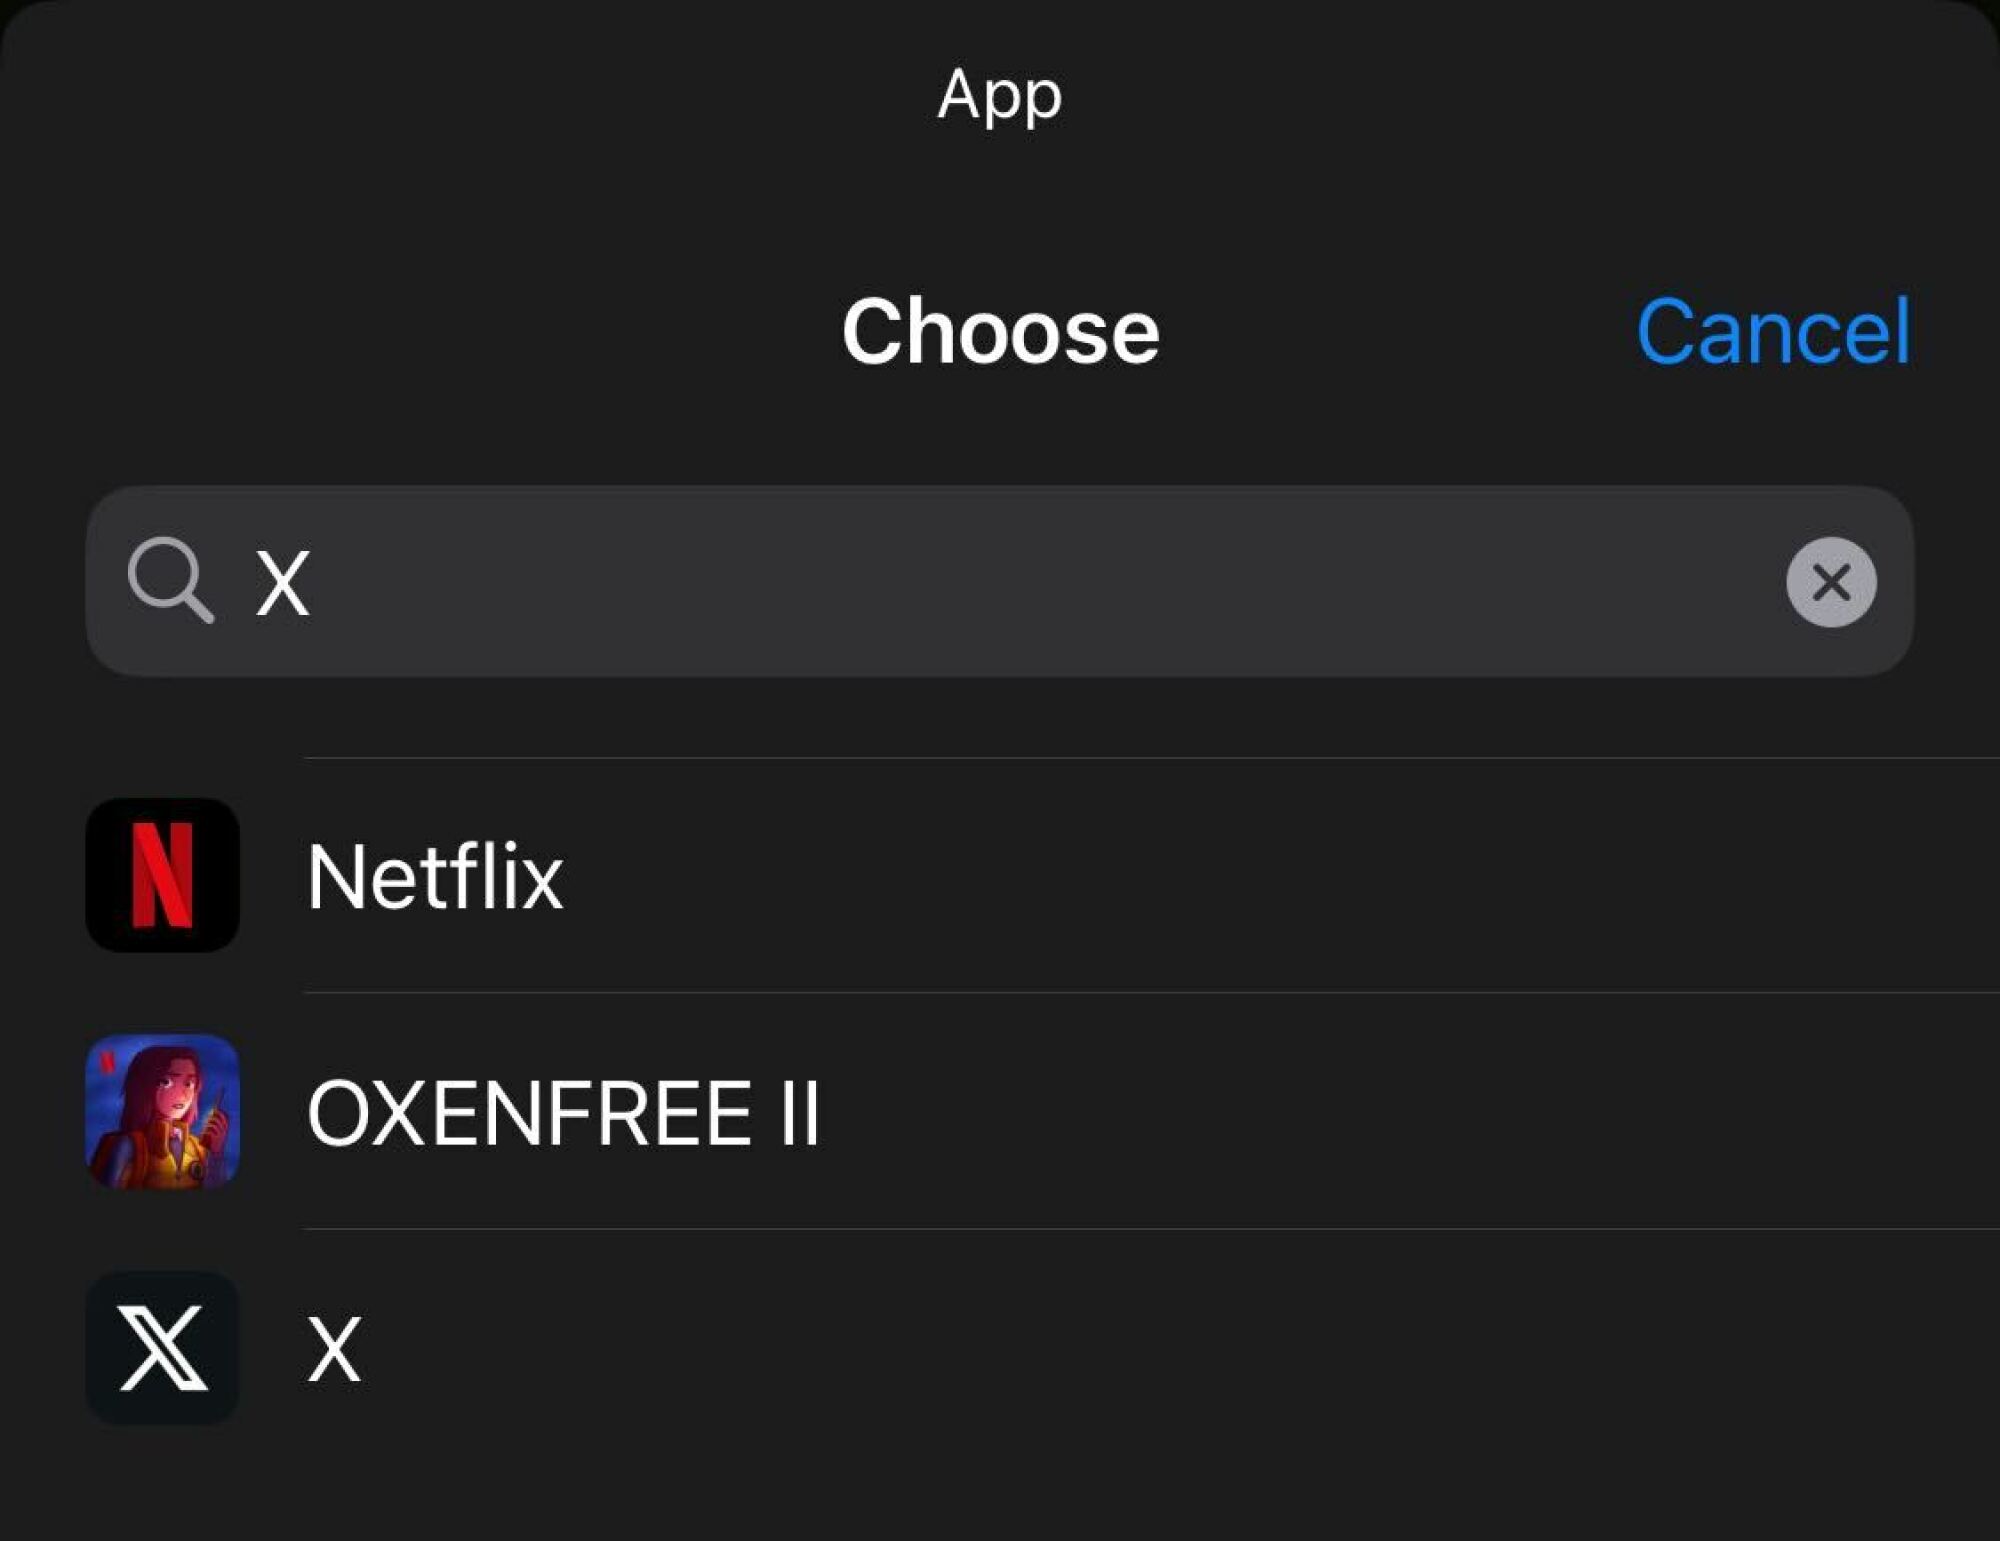 A search for X showing that app and two others.